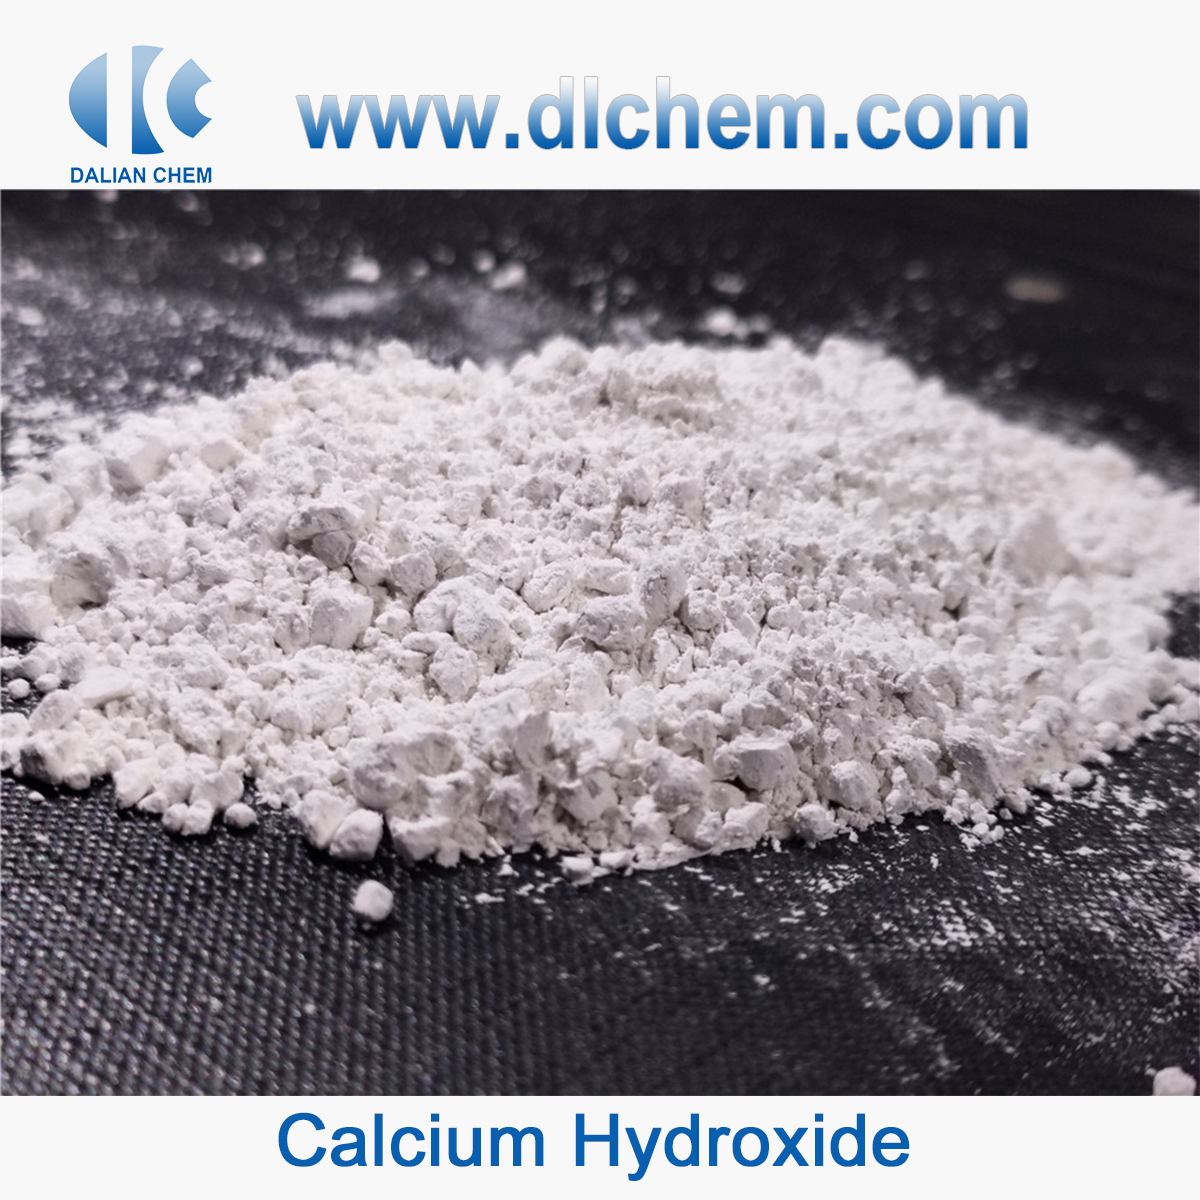 Hot Sale USP Calcium Hydroxide with Great Quality